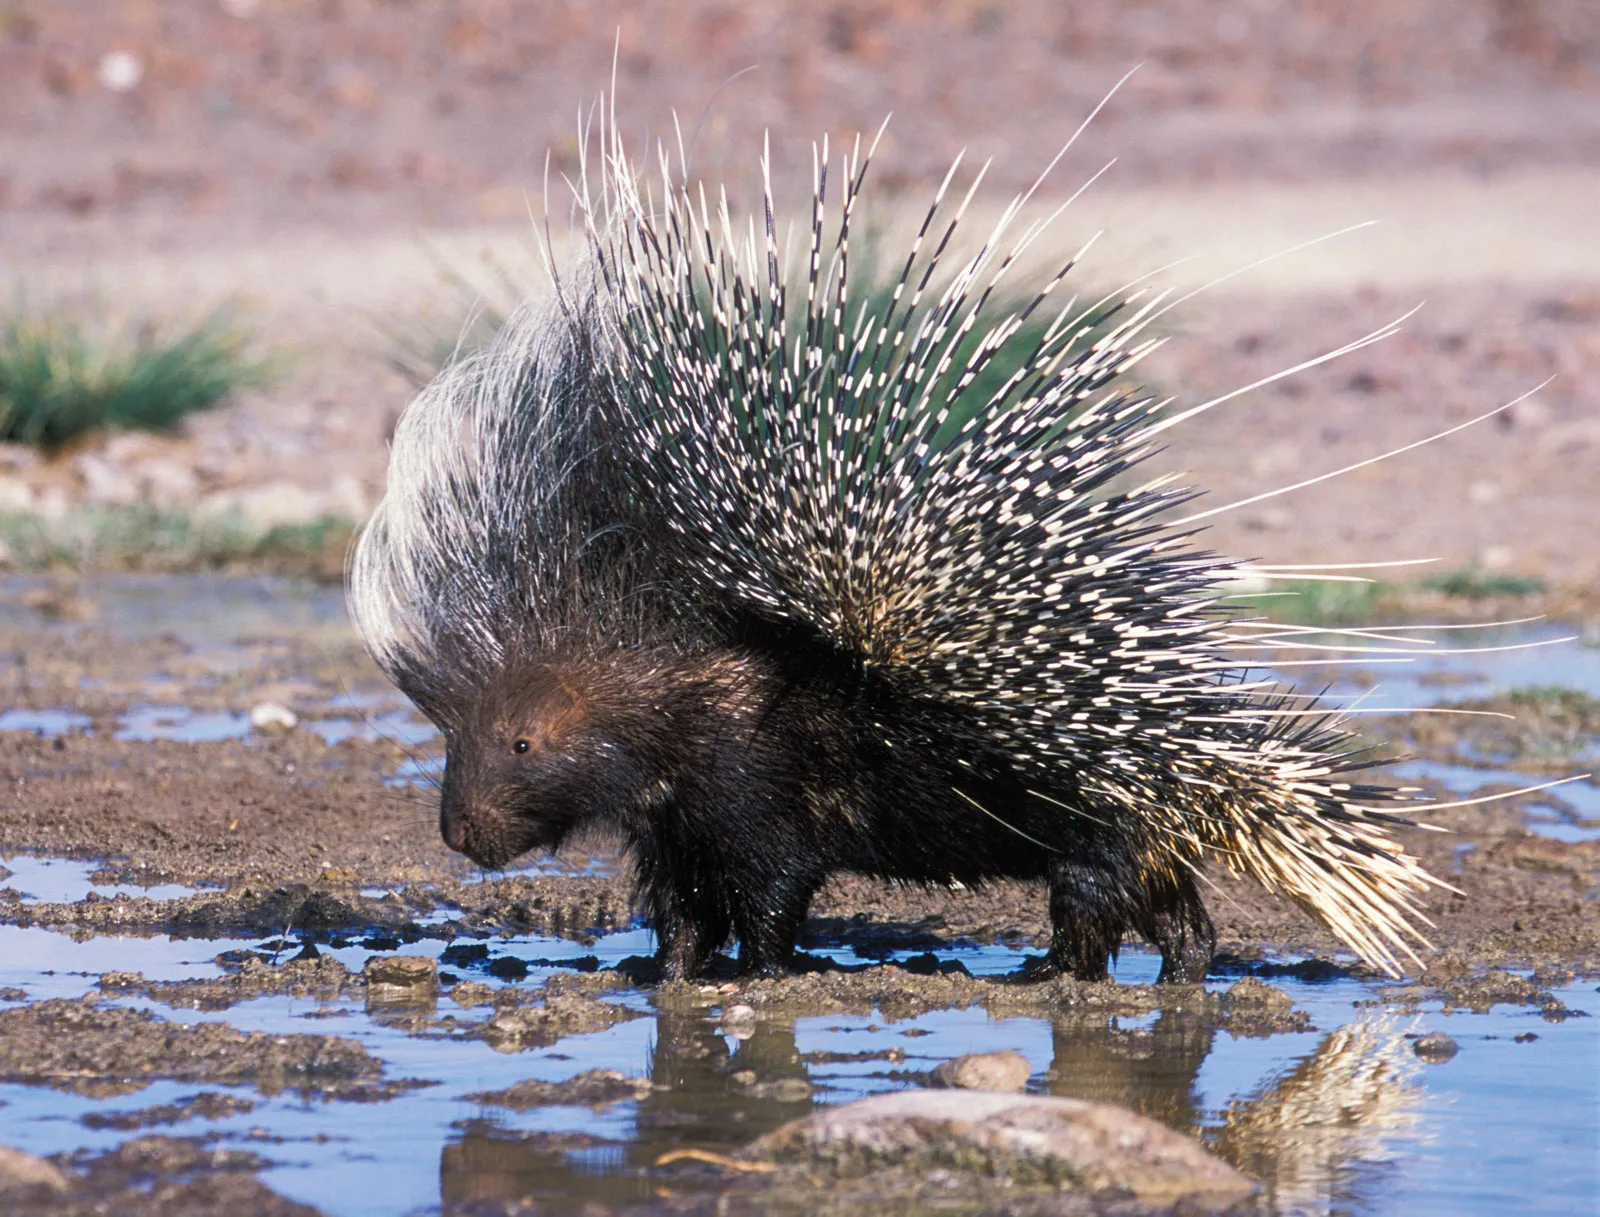 Meet the Crested Porcupine